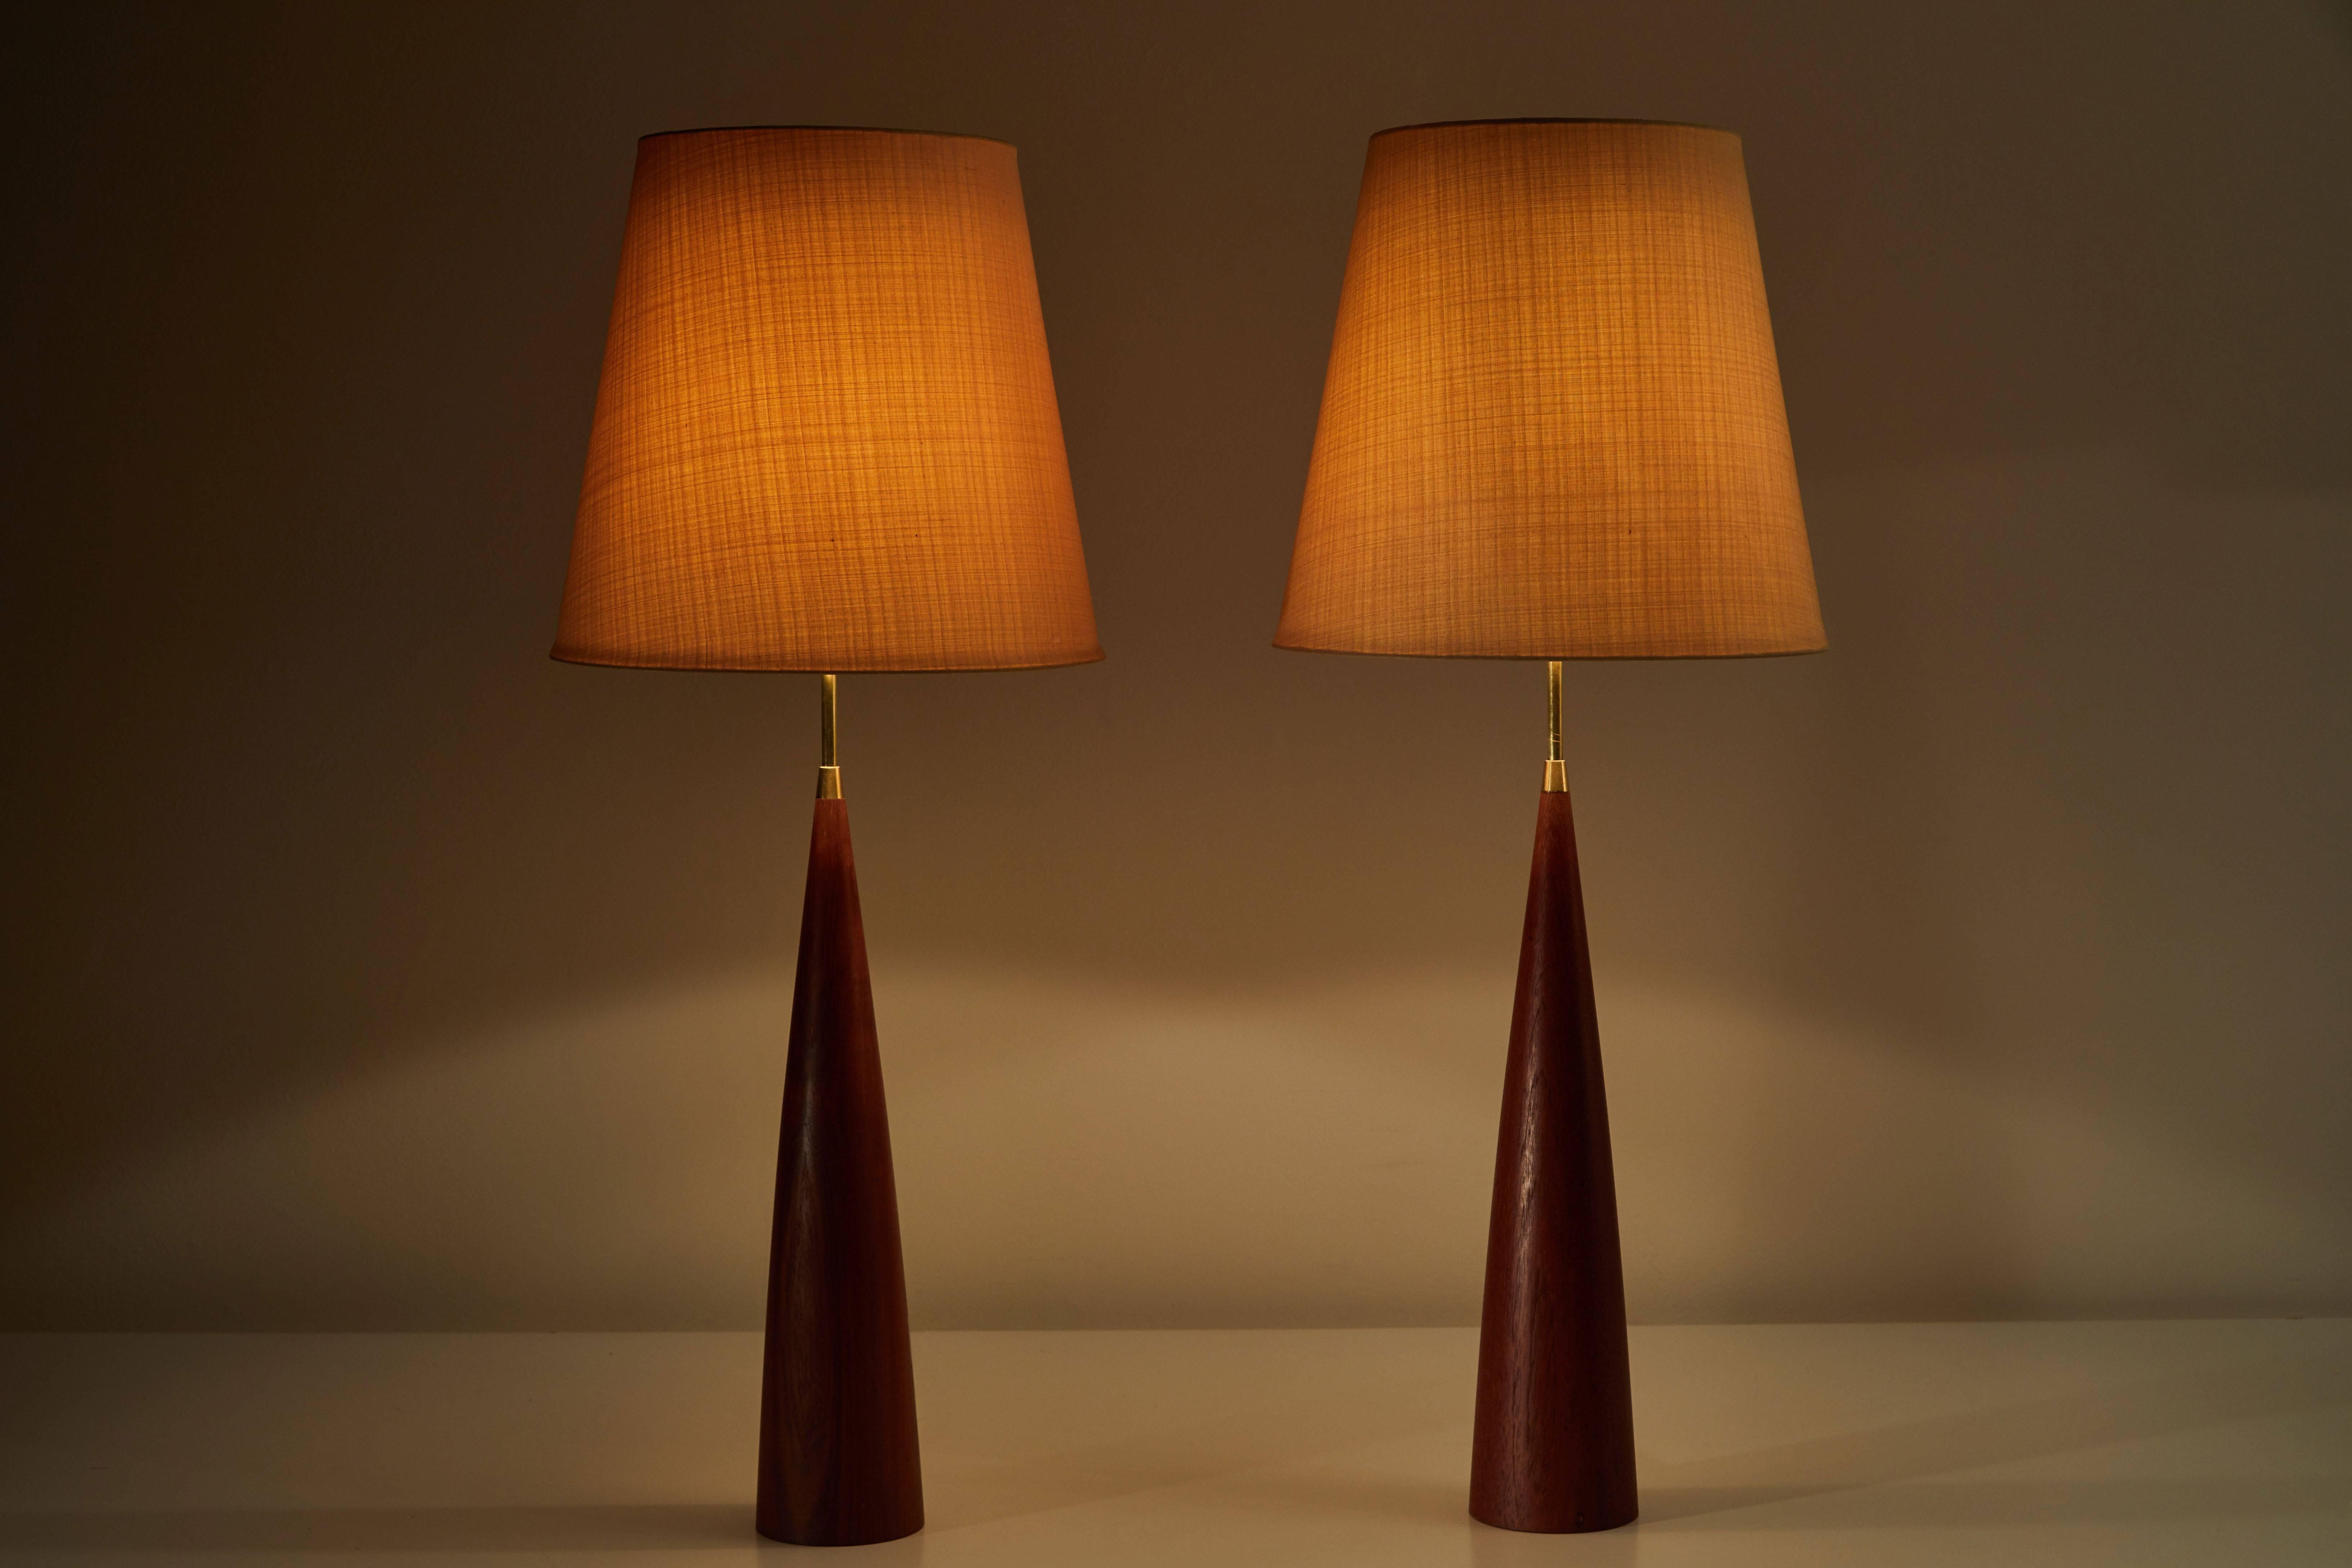 Pair of teak table lamps with original linen shades and brass hardware designed in Sweden, circa 1950s. Original cords. Each light takes one E27 100w maximum bulb.